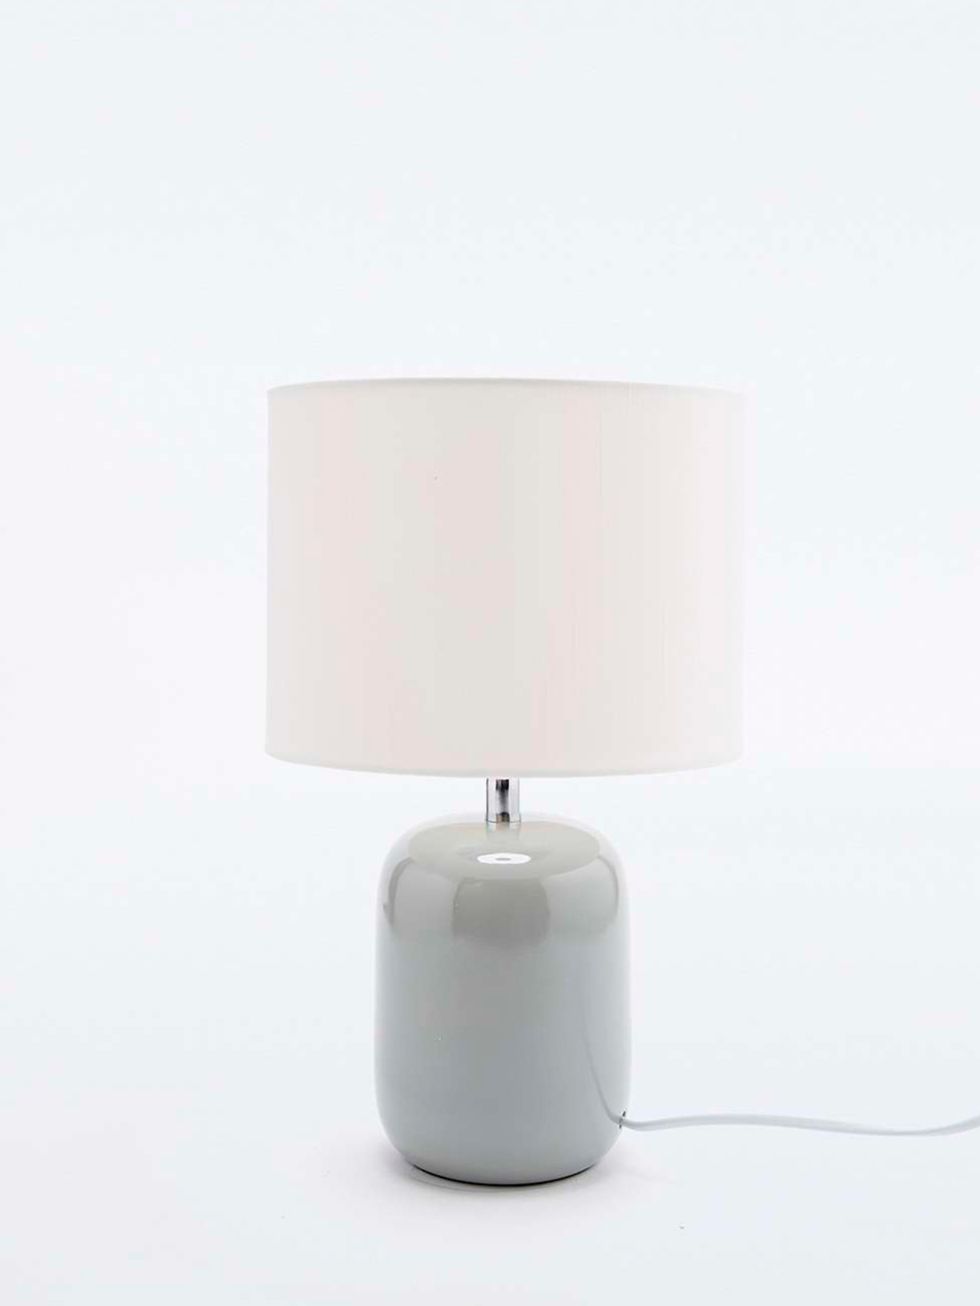 Product, Lighting accessory, Light, Grey, Tints and shades, Lamp, Cylinder, Electricity, Circle, Still life photography, 